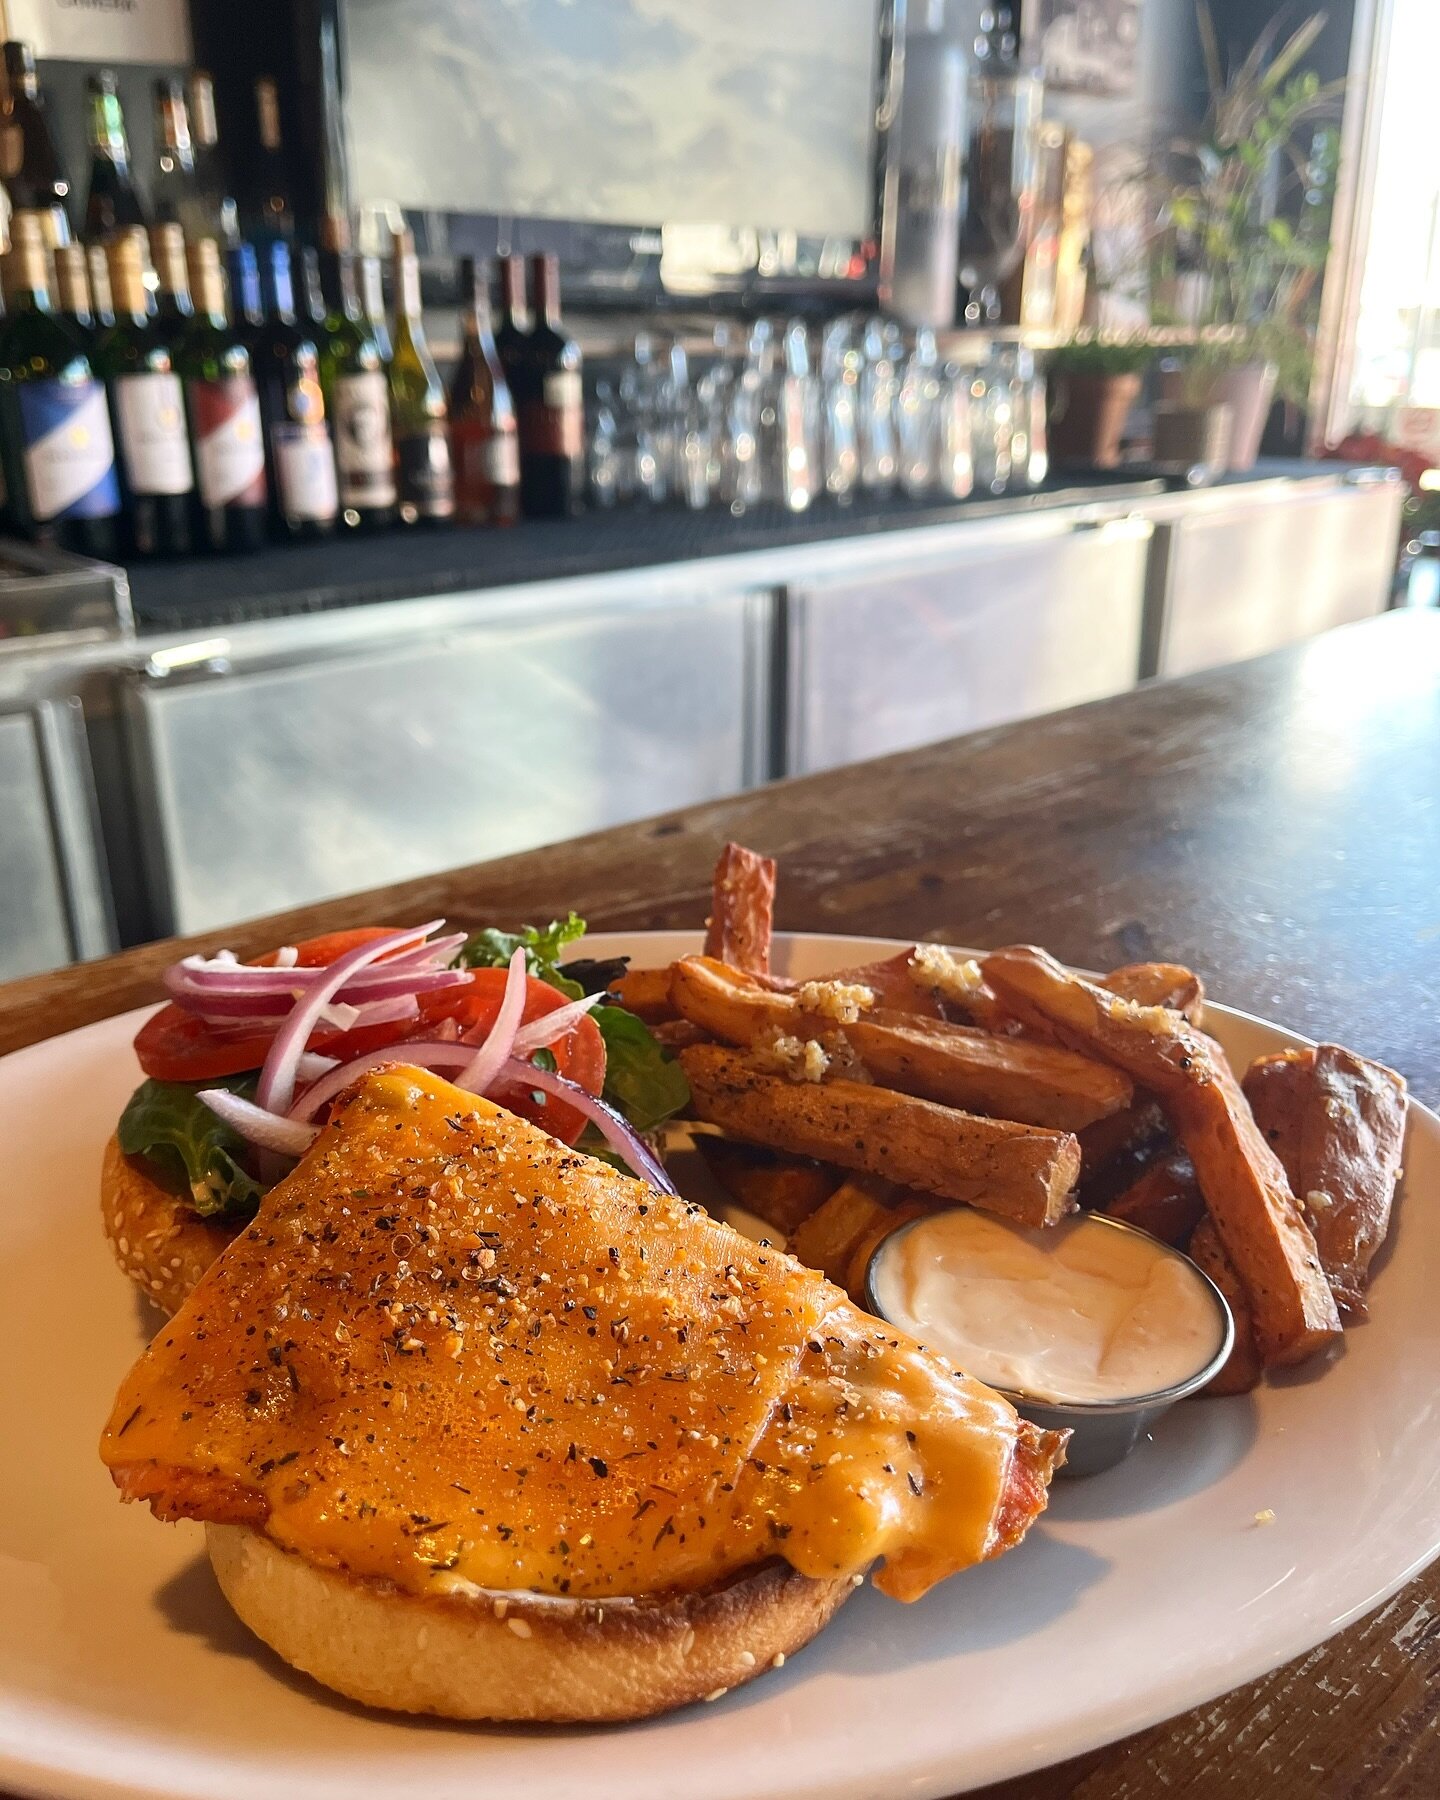 Wild Salmon Burger🐟
~ served with your choice of fries or house salad, or upgrade to garlic sweet potato fries with chipotle mayo as shown! ~